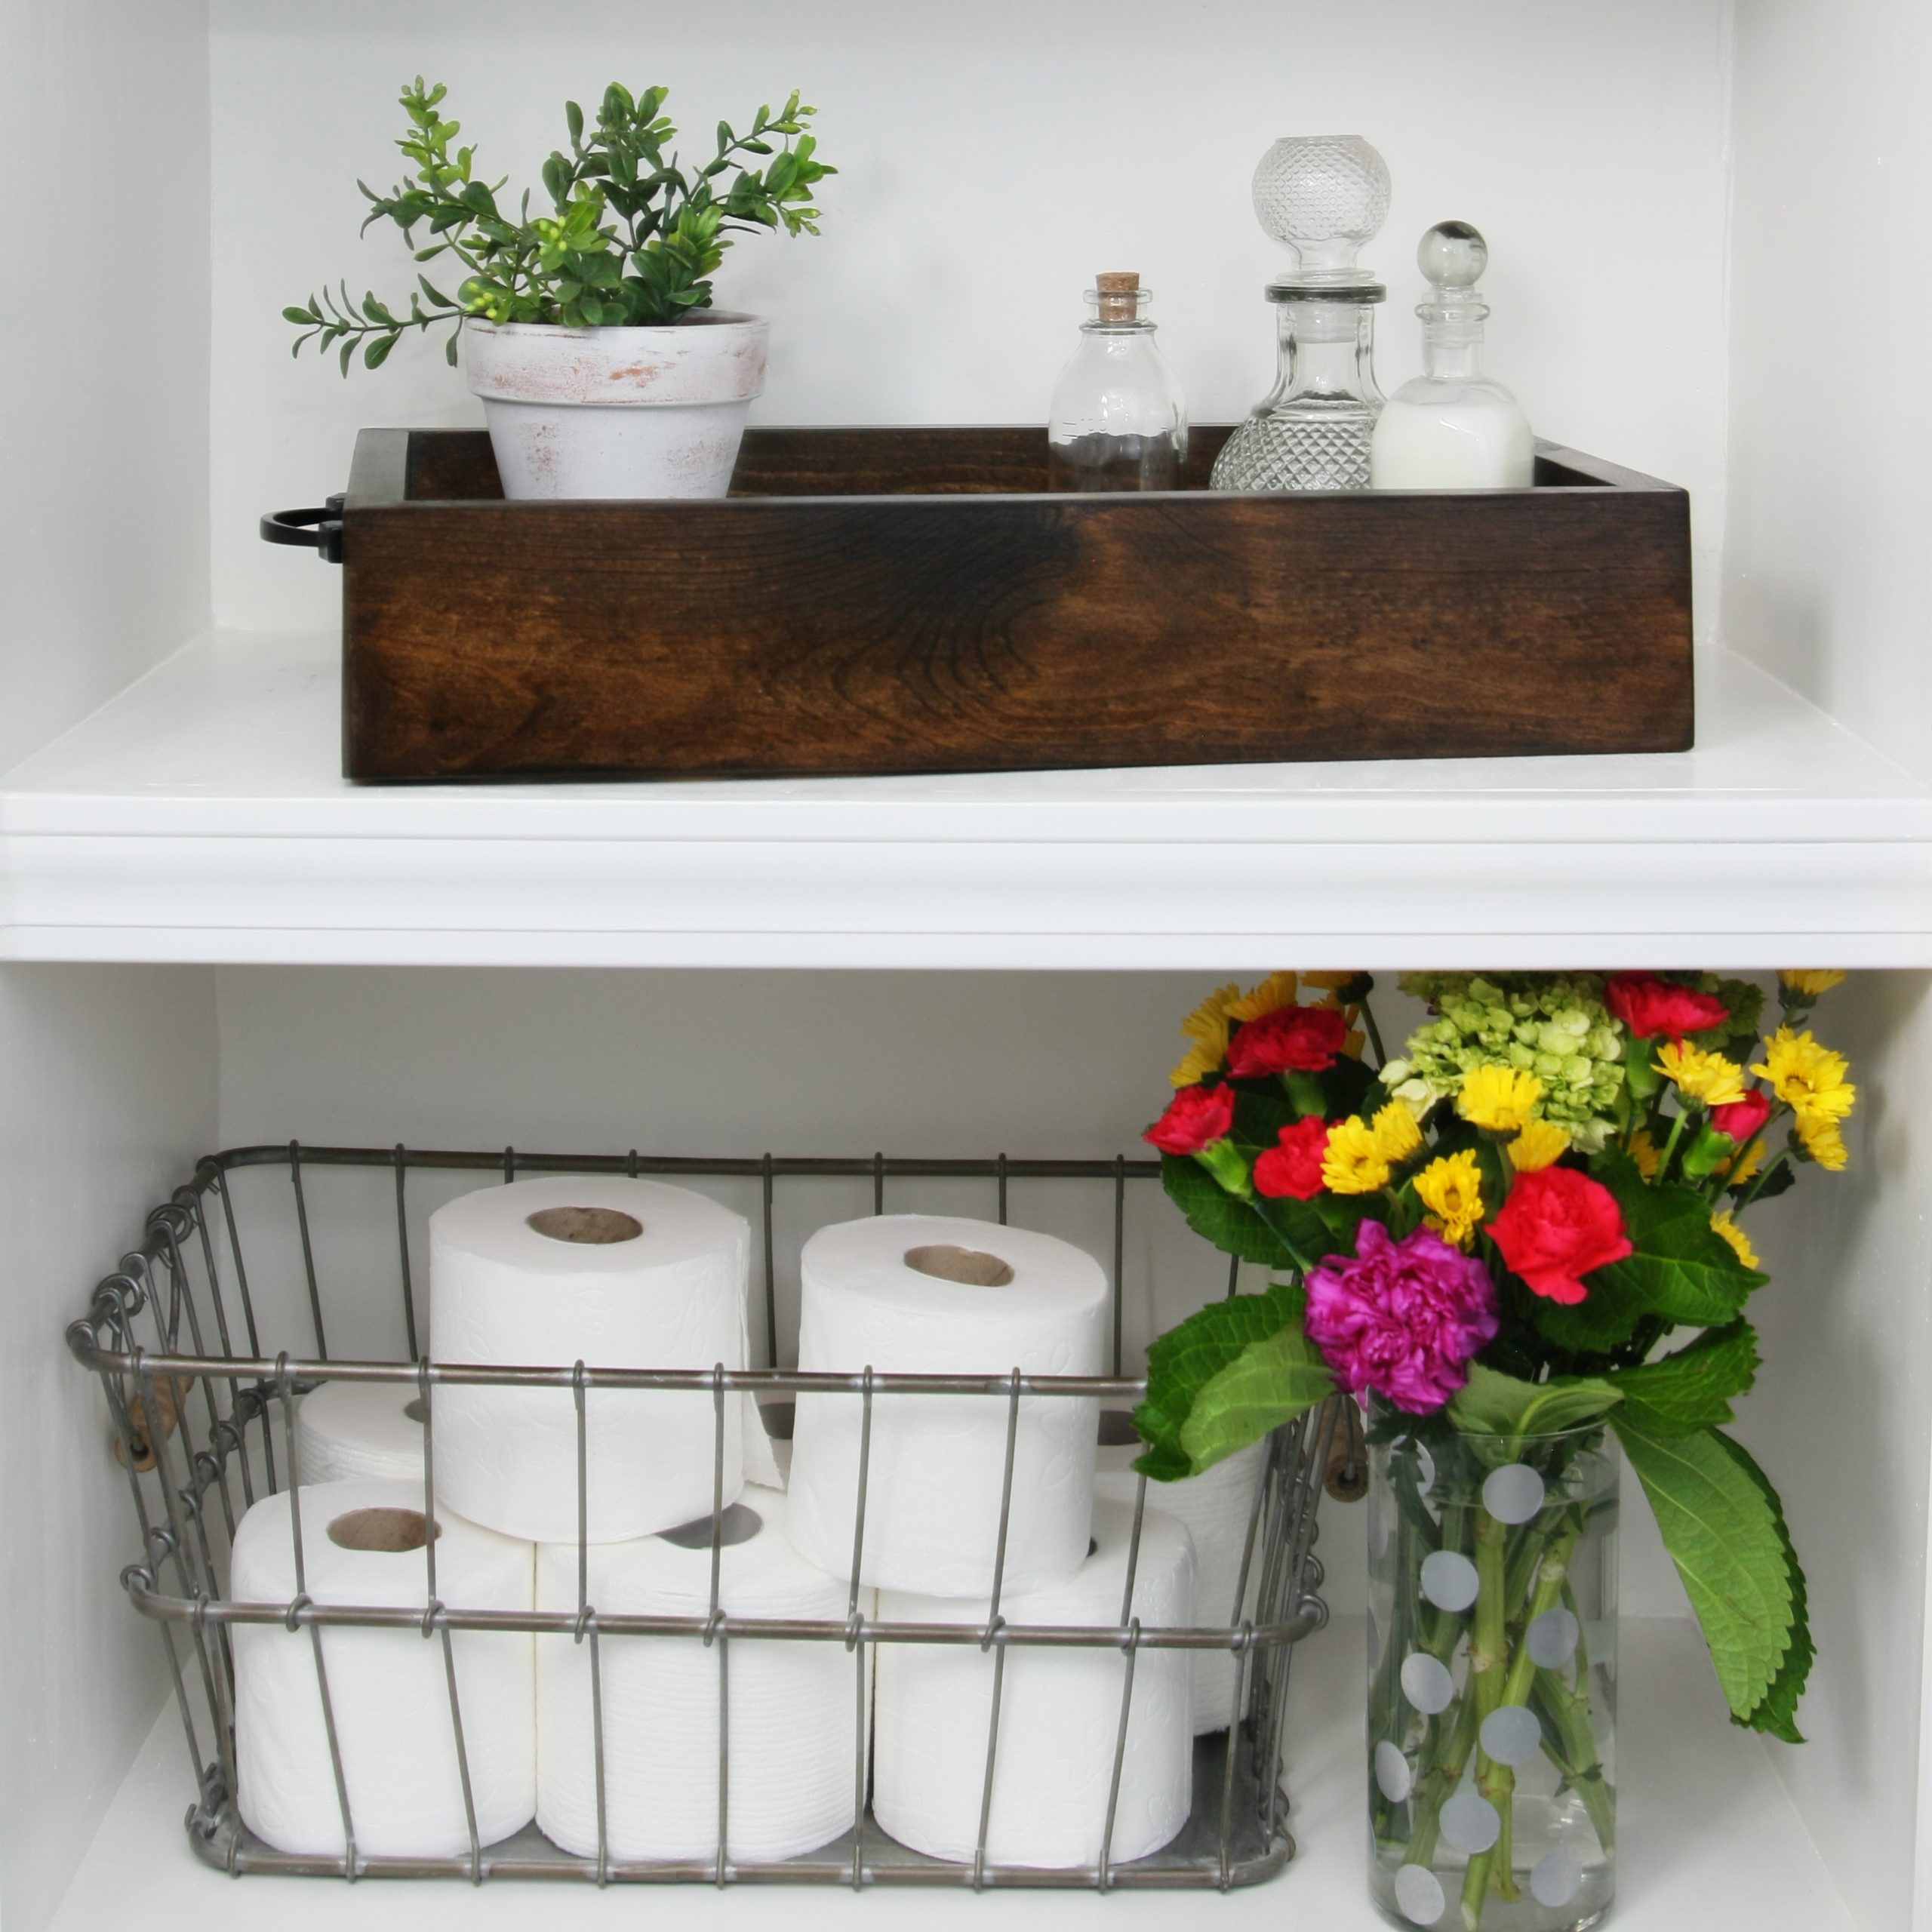 14 Genius Small Bathroom Storage Solutions with Farmhouse Style